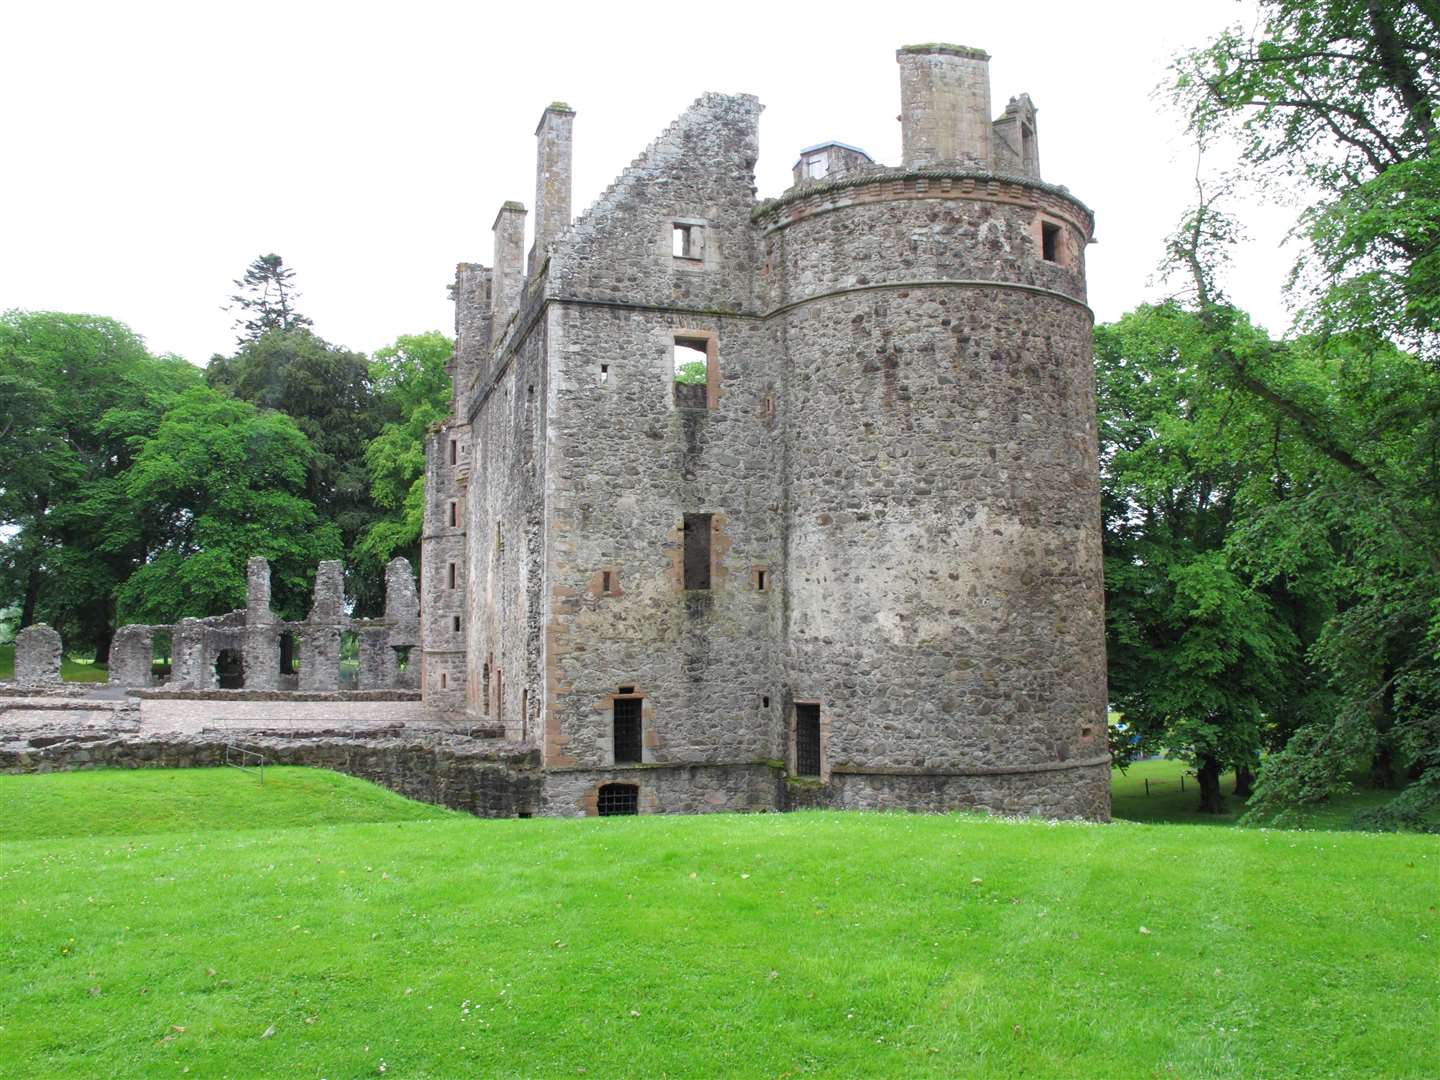 Huntly Castle is included in the list of sites reopening from August through to mid-September.